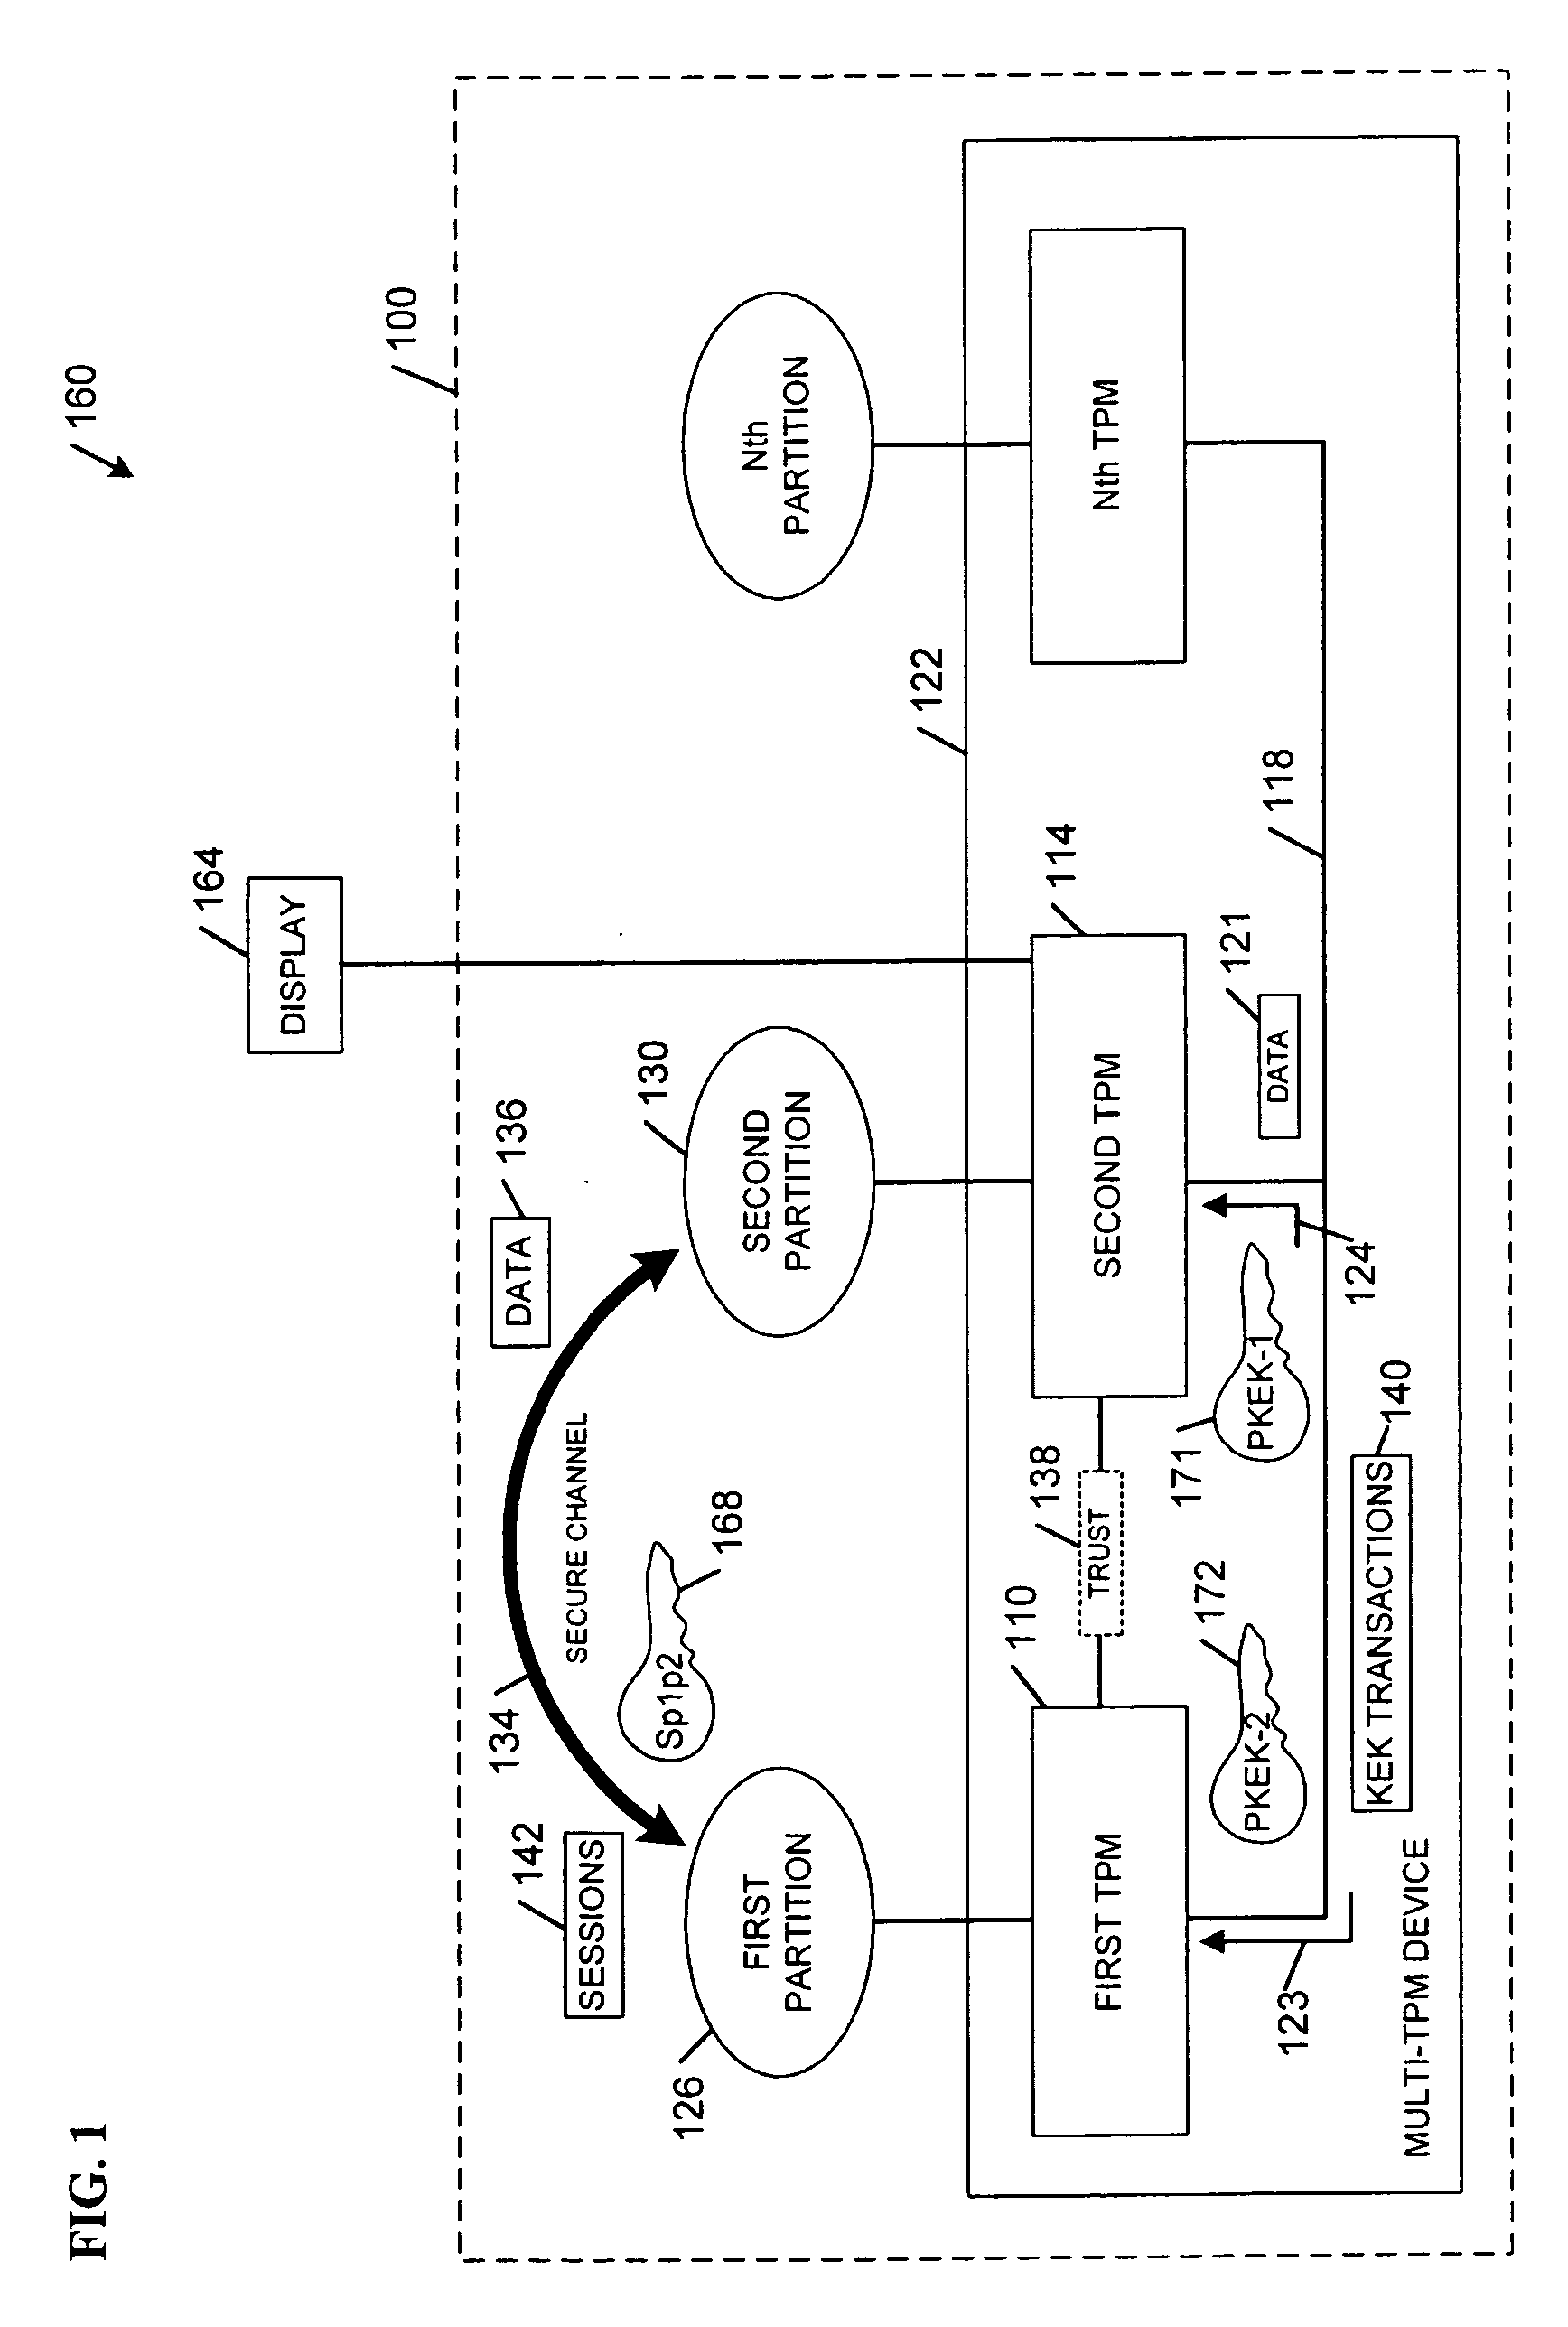 Trusted platform module apparatus, systems, and methods